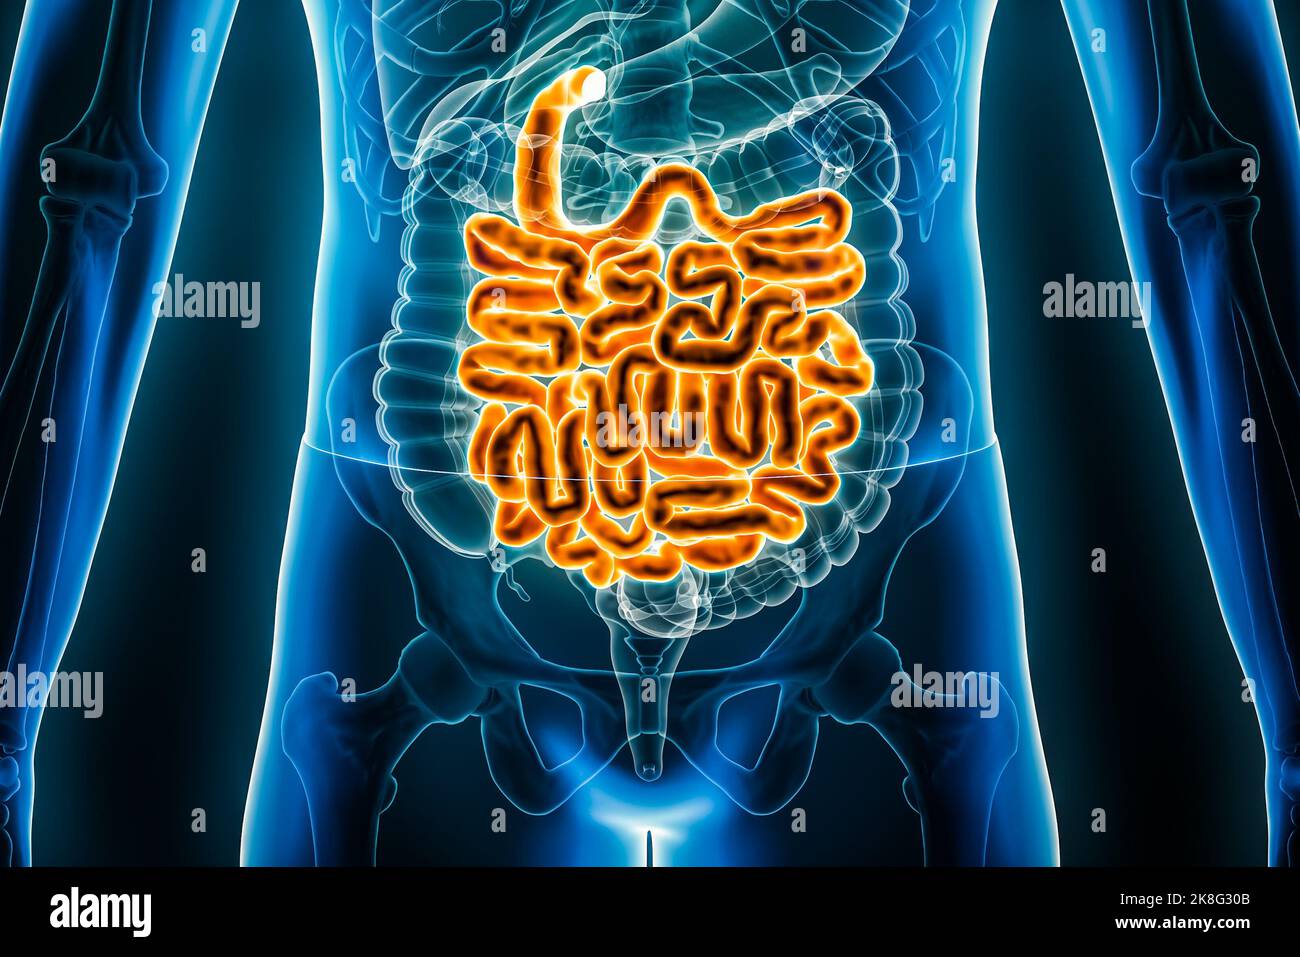 Small intestine or bowel 3D rendering illustration close-up. Anterior or front view of the human digestive system or bowels. Anatomy, medical, biology Stock Photo